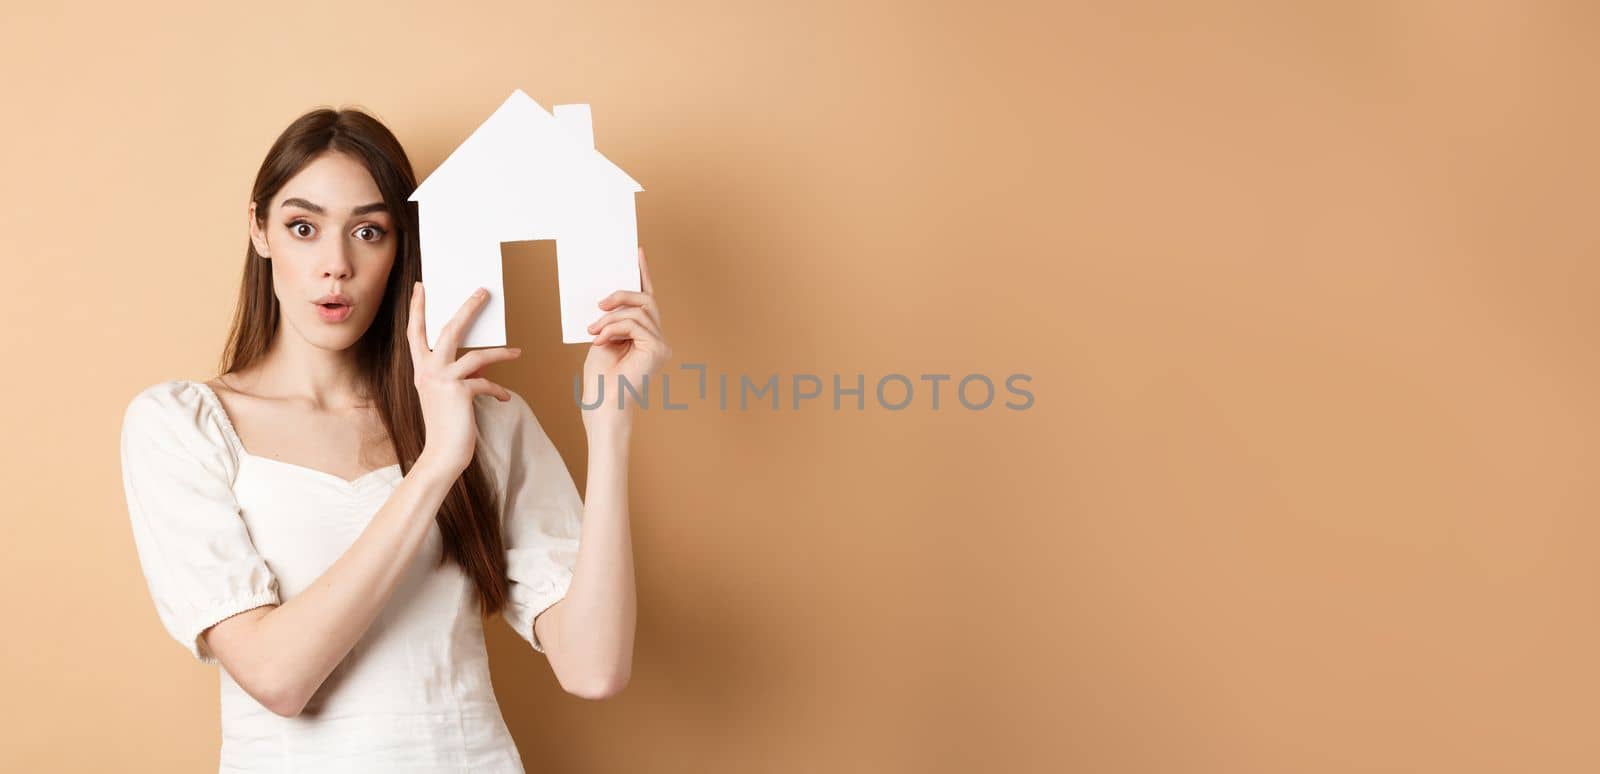 Real estate. Excited young woman showing house cutout and looking at camera, renting property, standing on beige background.